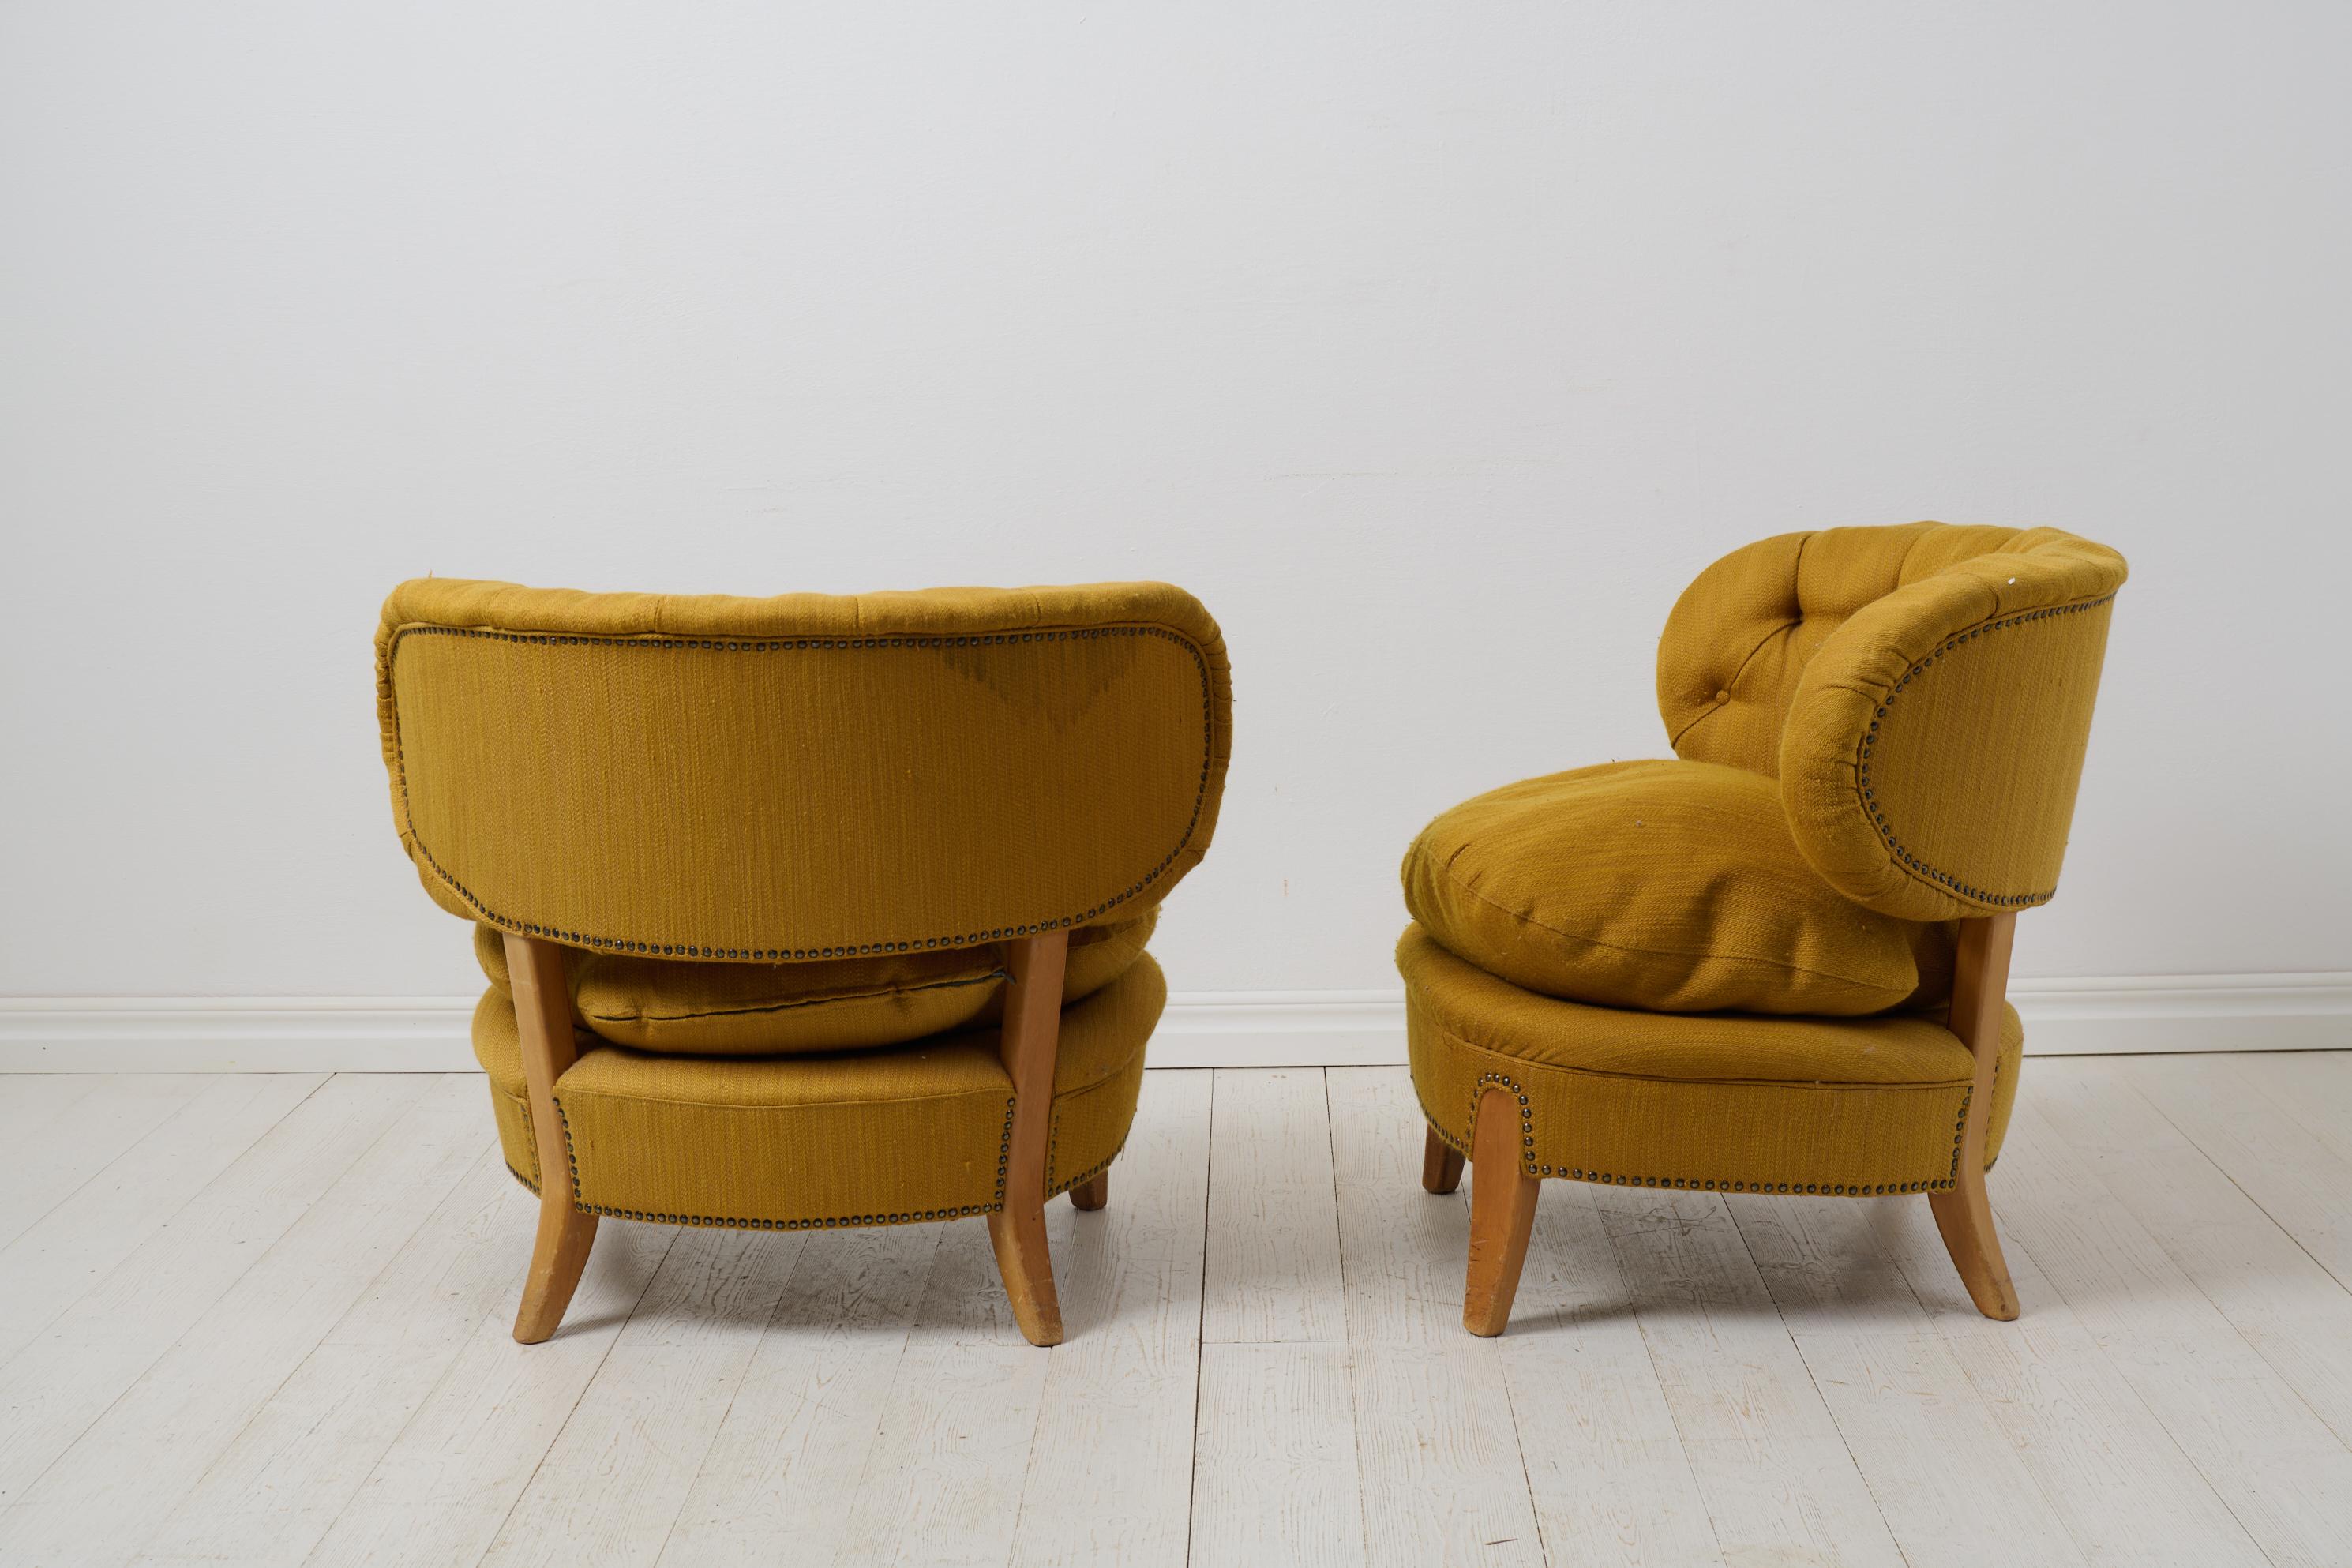 Otto Schulz Lounge Chairs, Pair of Scandinavian Modern Original Schulz In Good Condition For Sale In Kramfors, SE